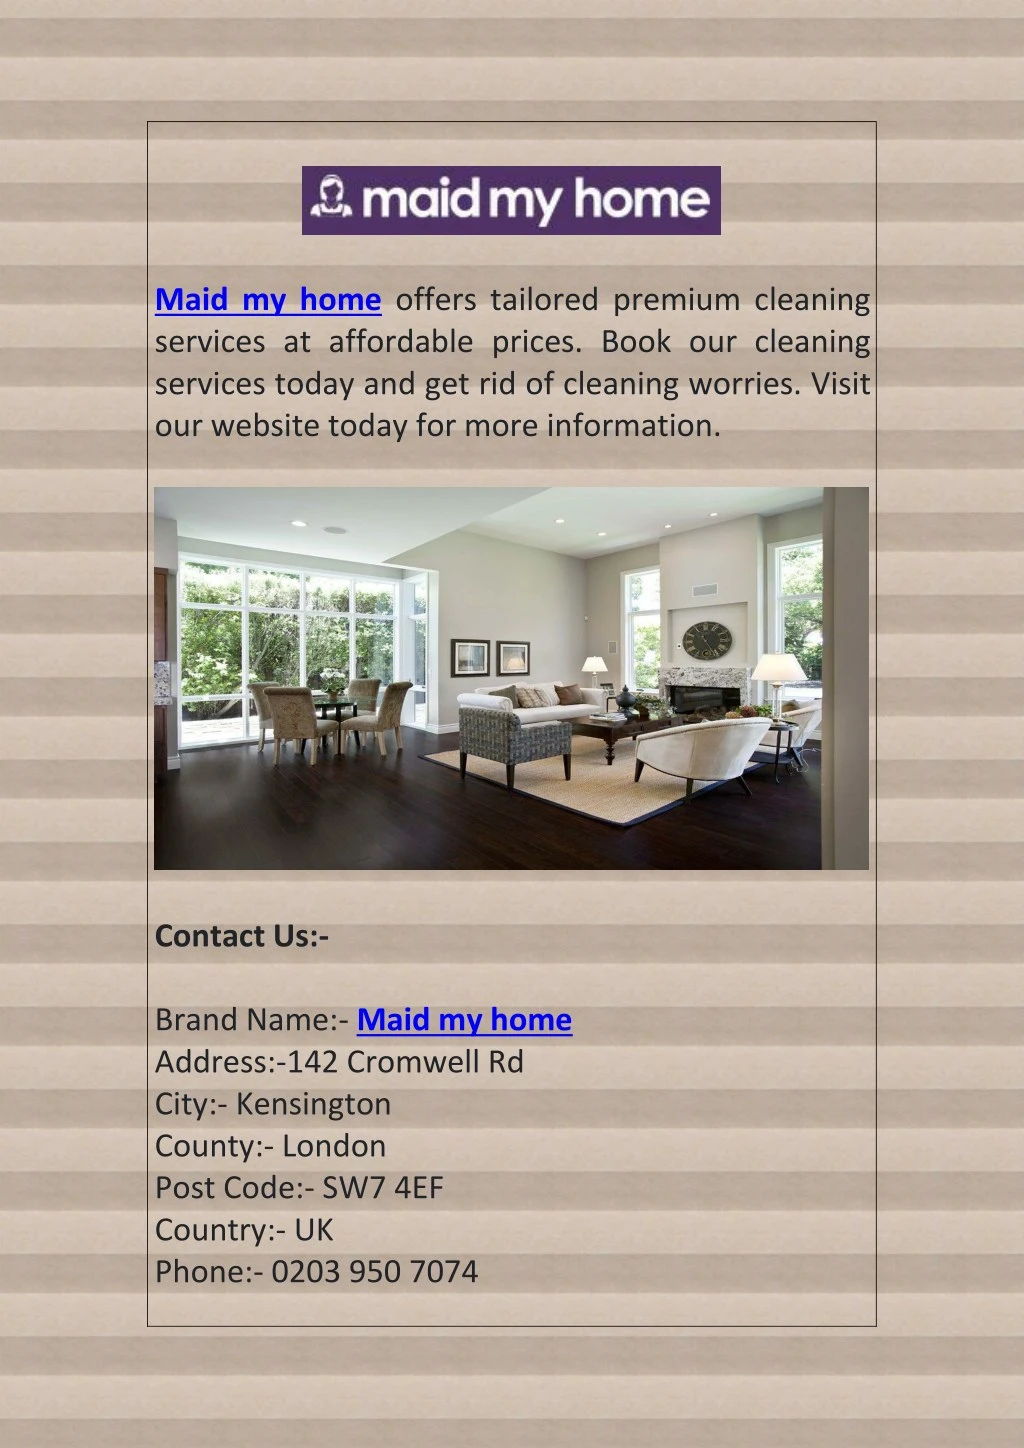 maid my home offers tailored premium cleaning